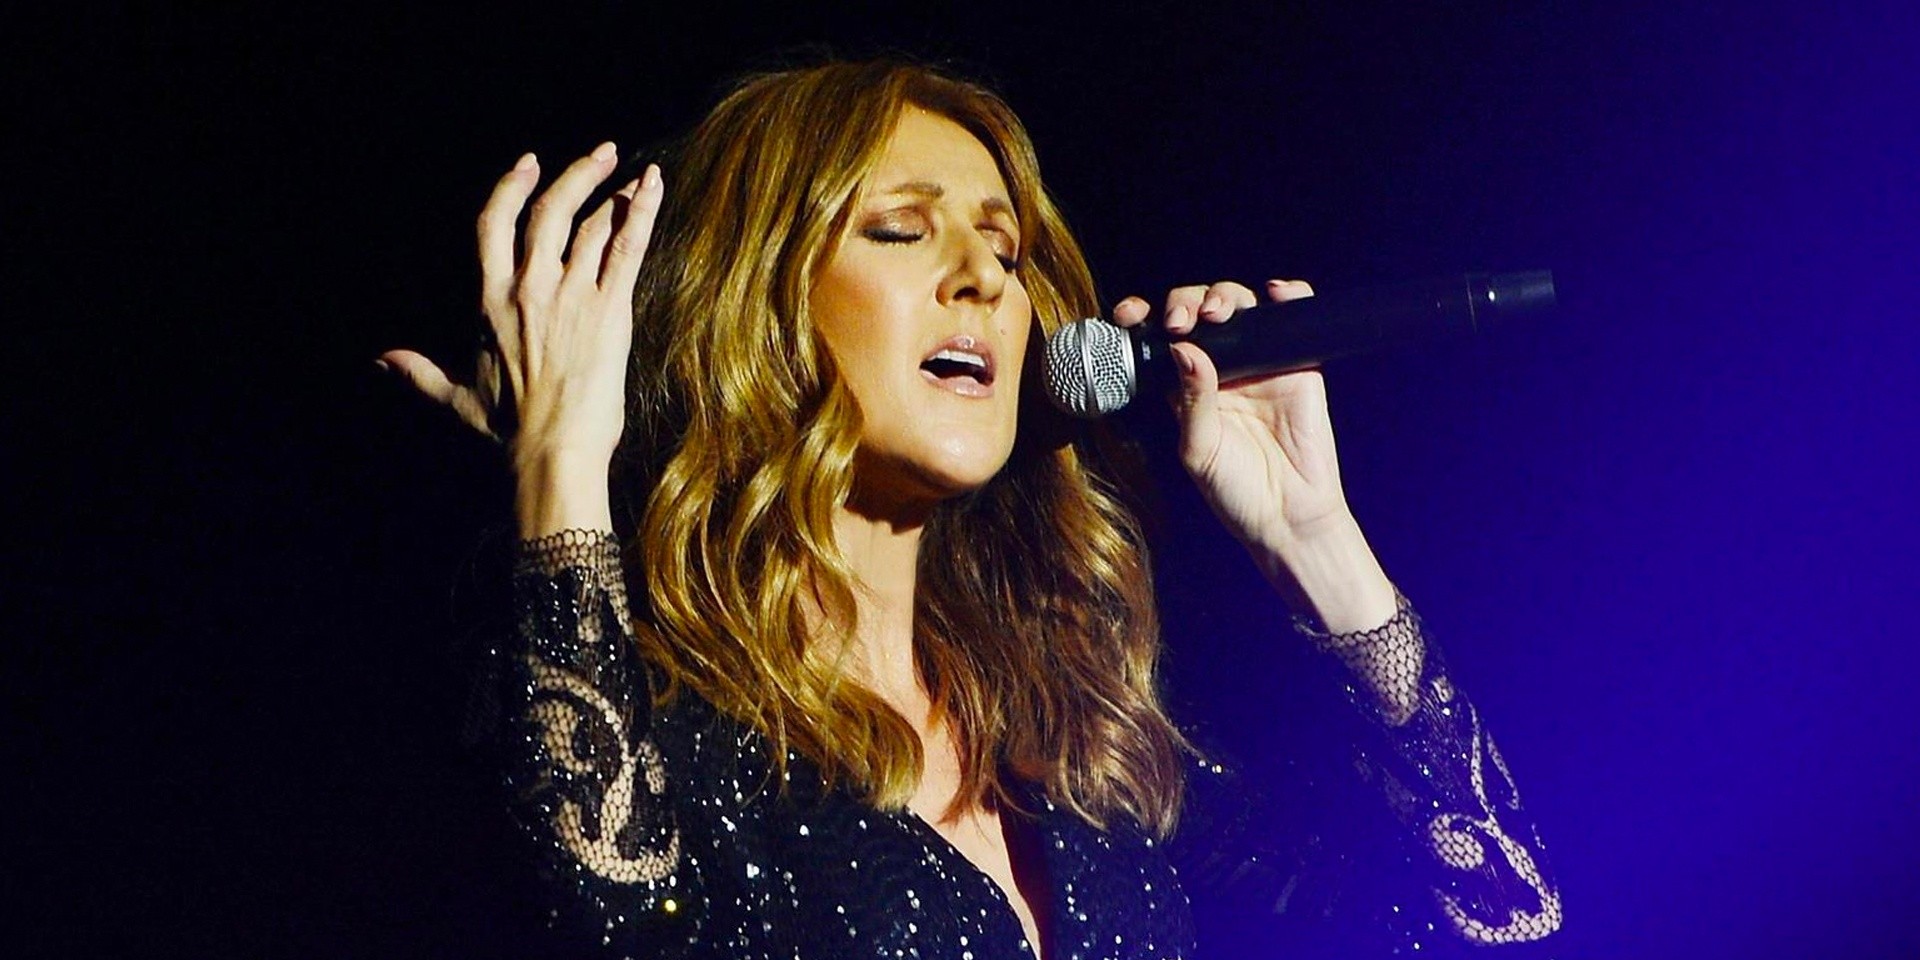 Both Céline Dion's concerts in Singapore are now sold out